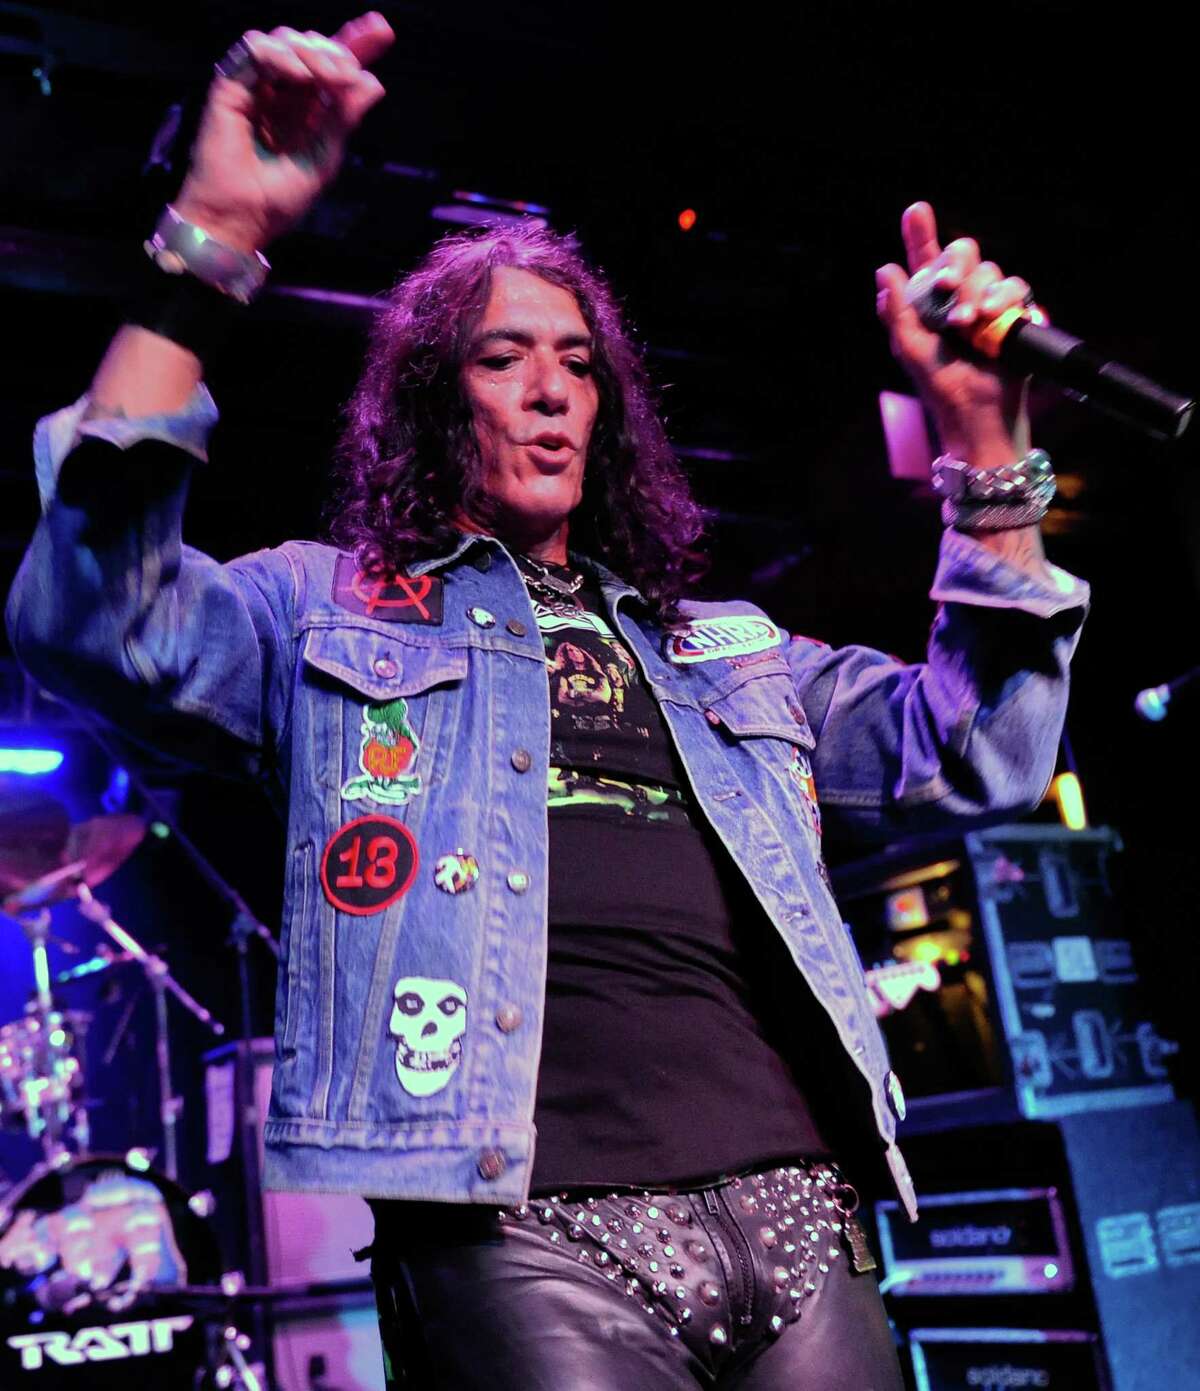 Former Ratt singer Stephen Pearcy performed Cohoes Music Hall Sunday night.